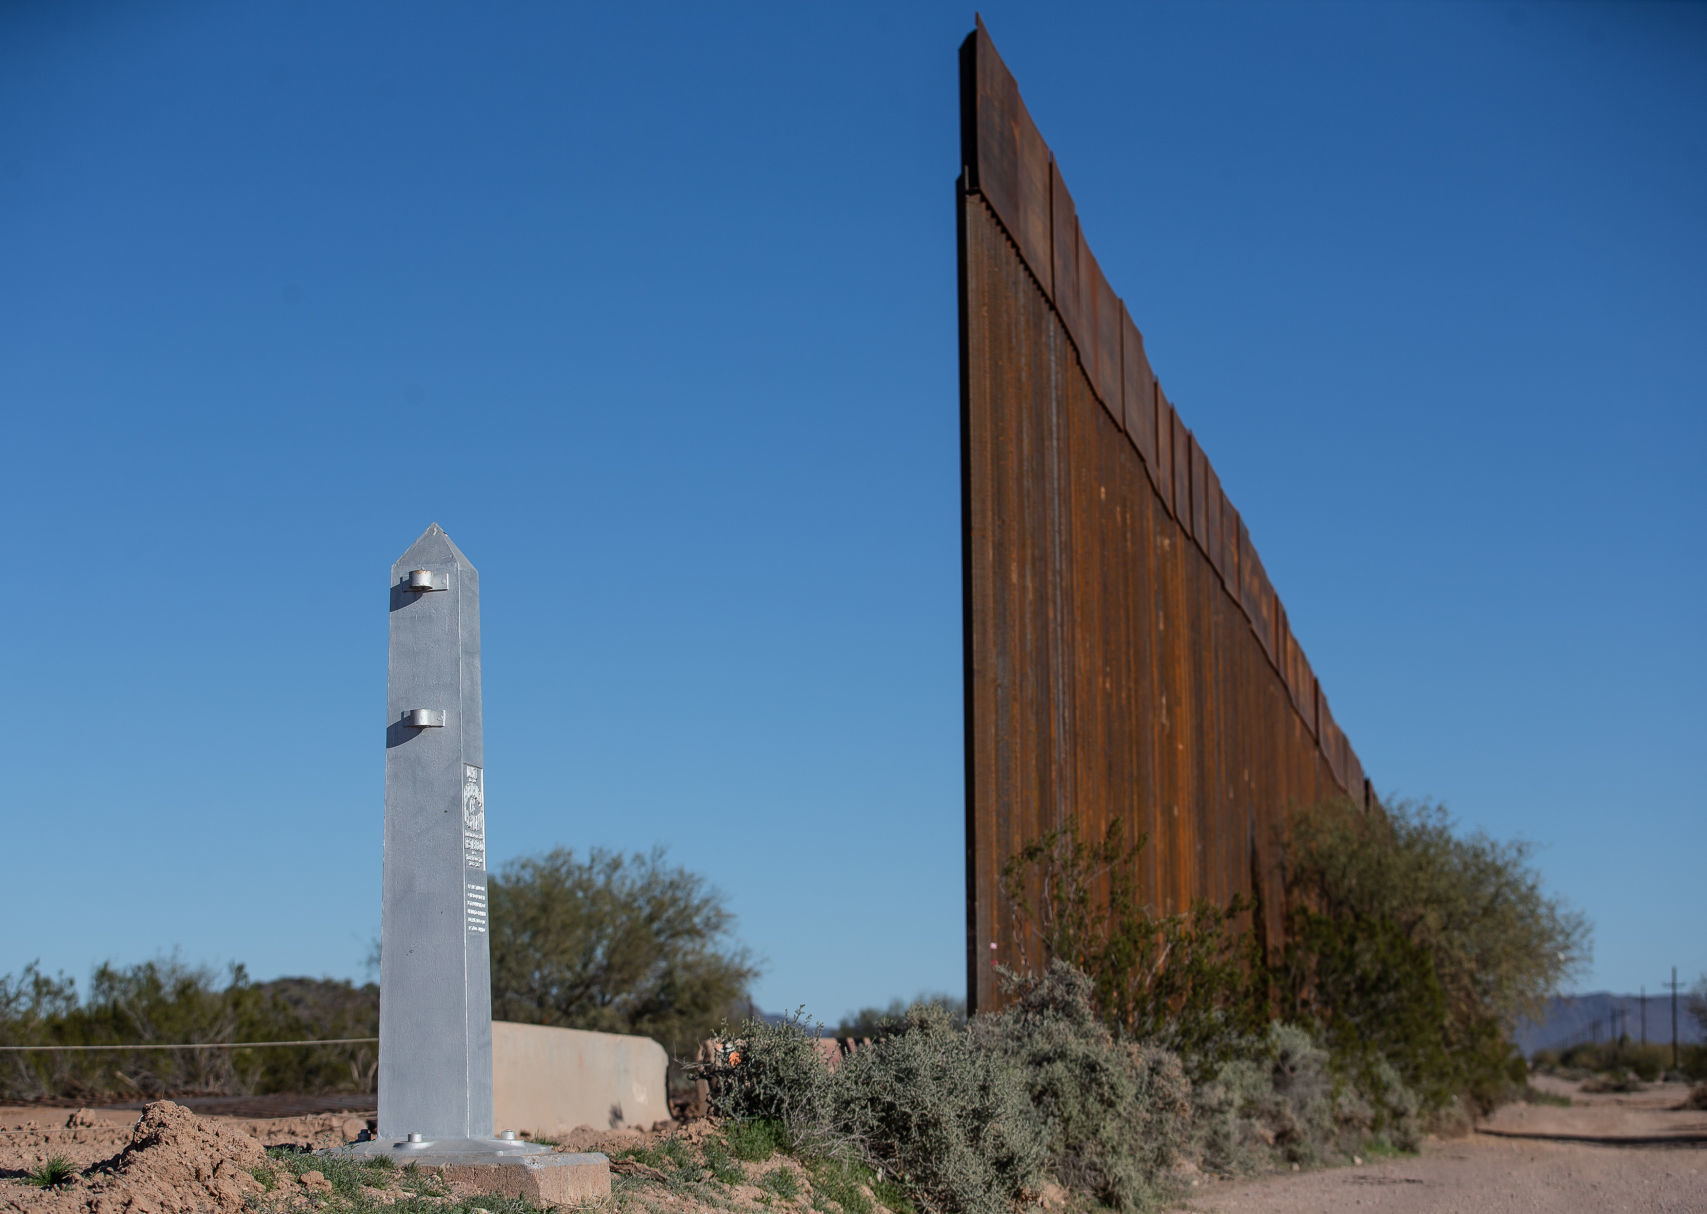 Steel for border wall going up in Arizona made by company with Trump PAC ties picture